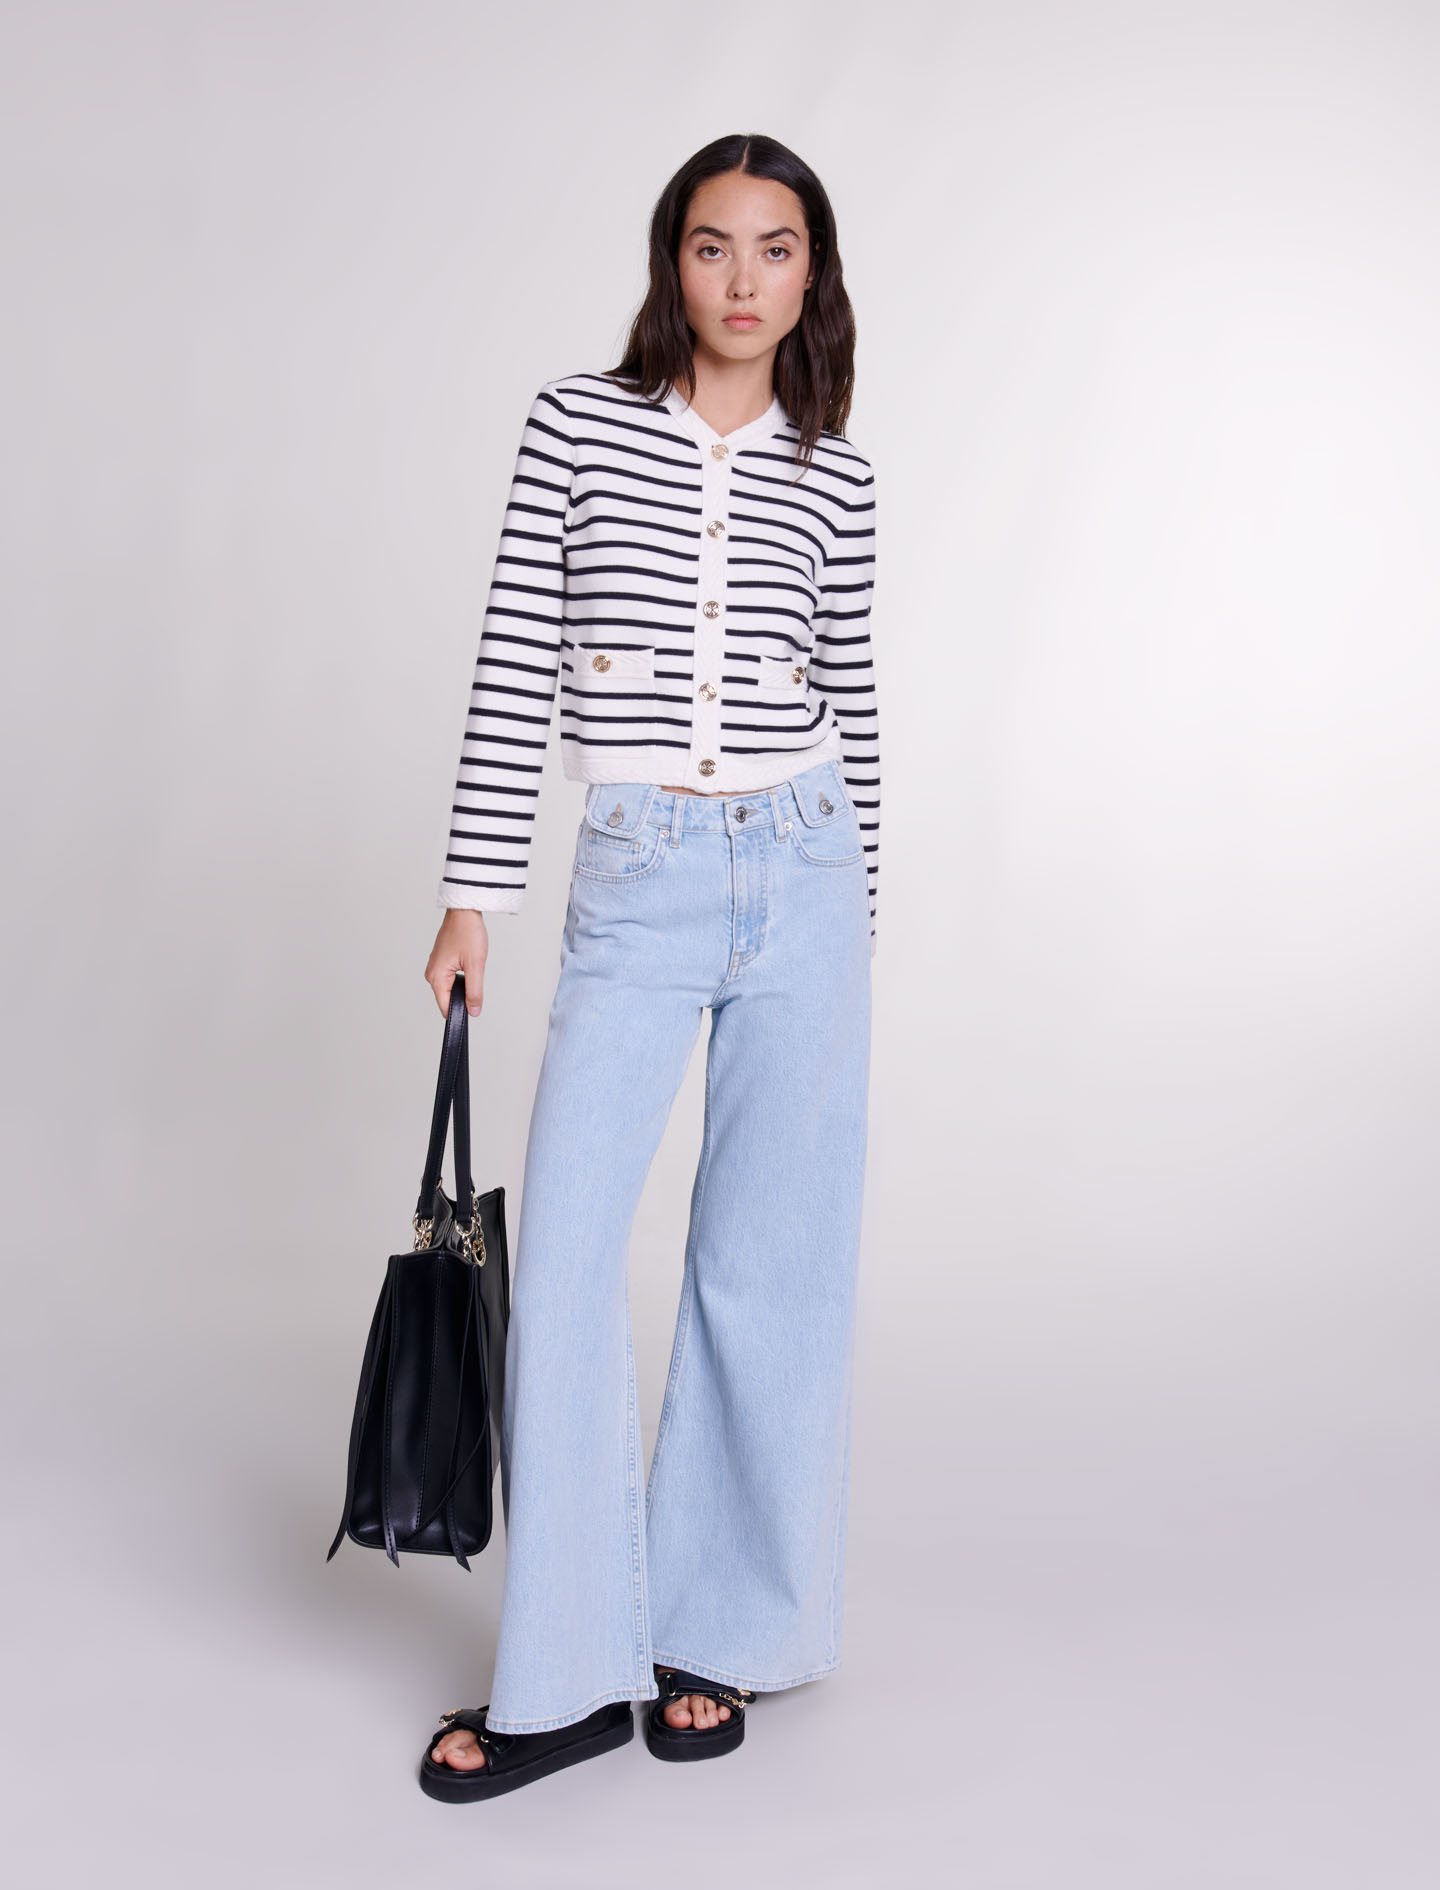 Shop Maje Striped Knit Cardigan For Spring/summer In Navy